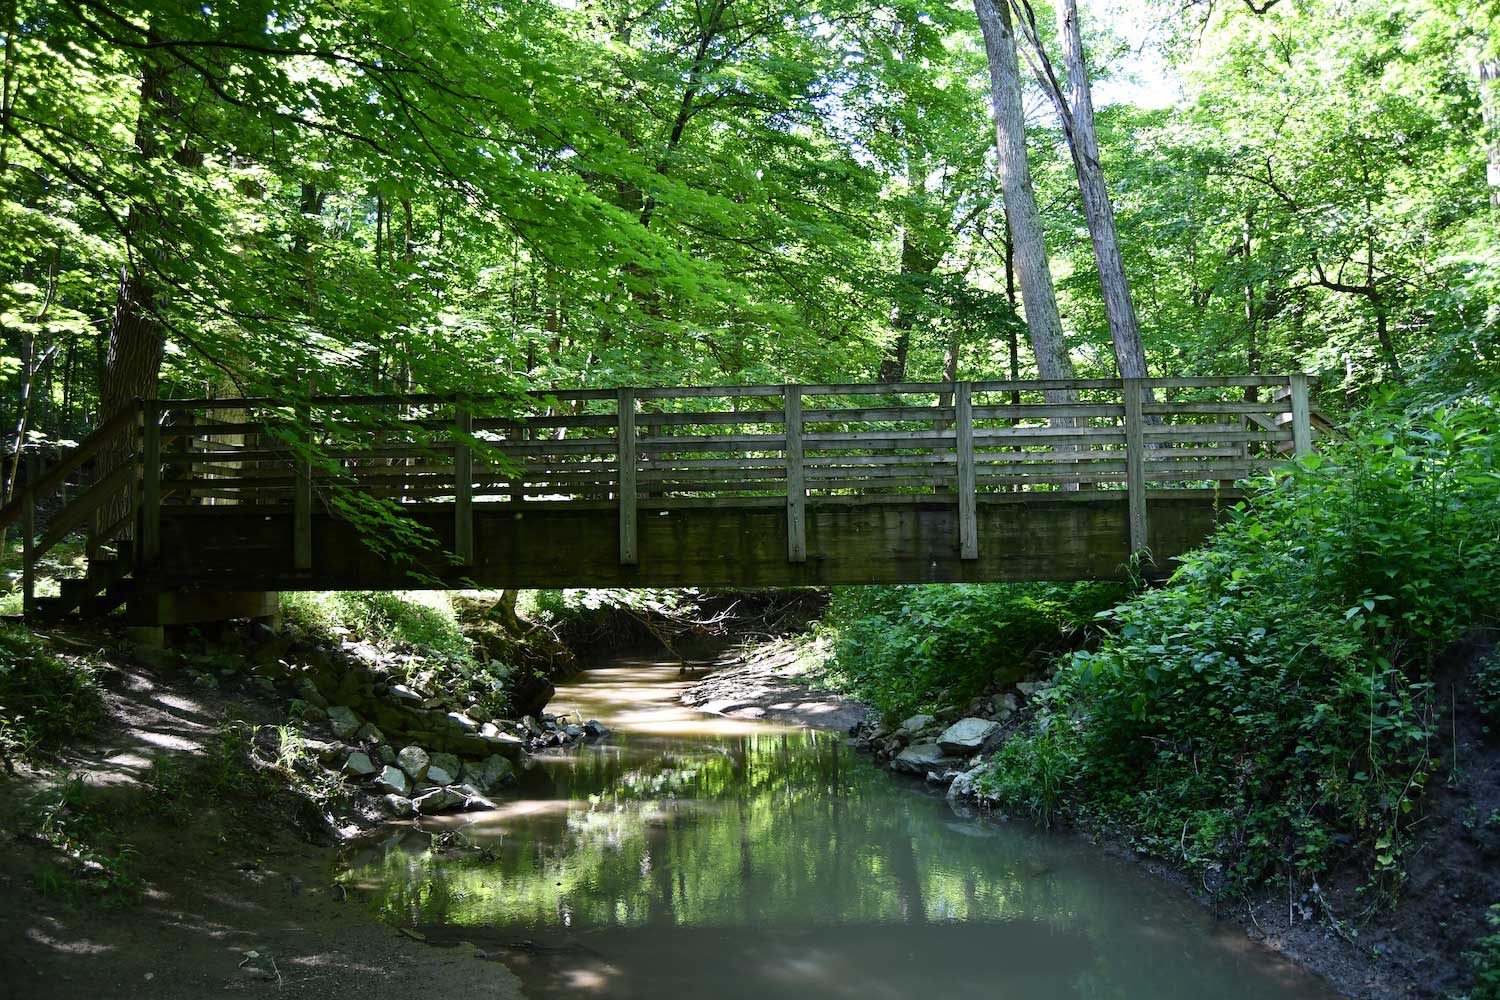 A wooden bridge spanning a creek in a forest.